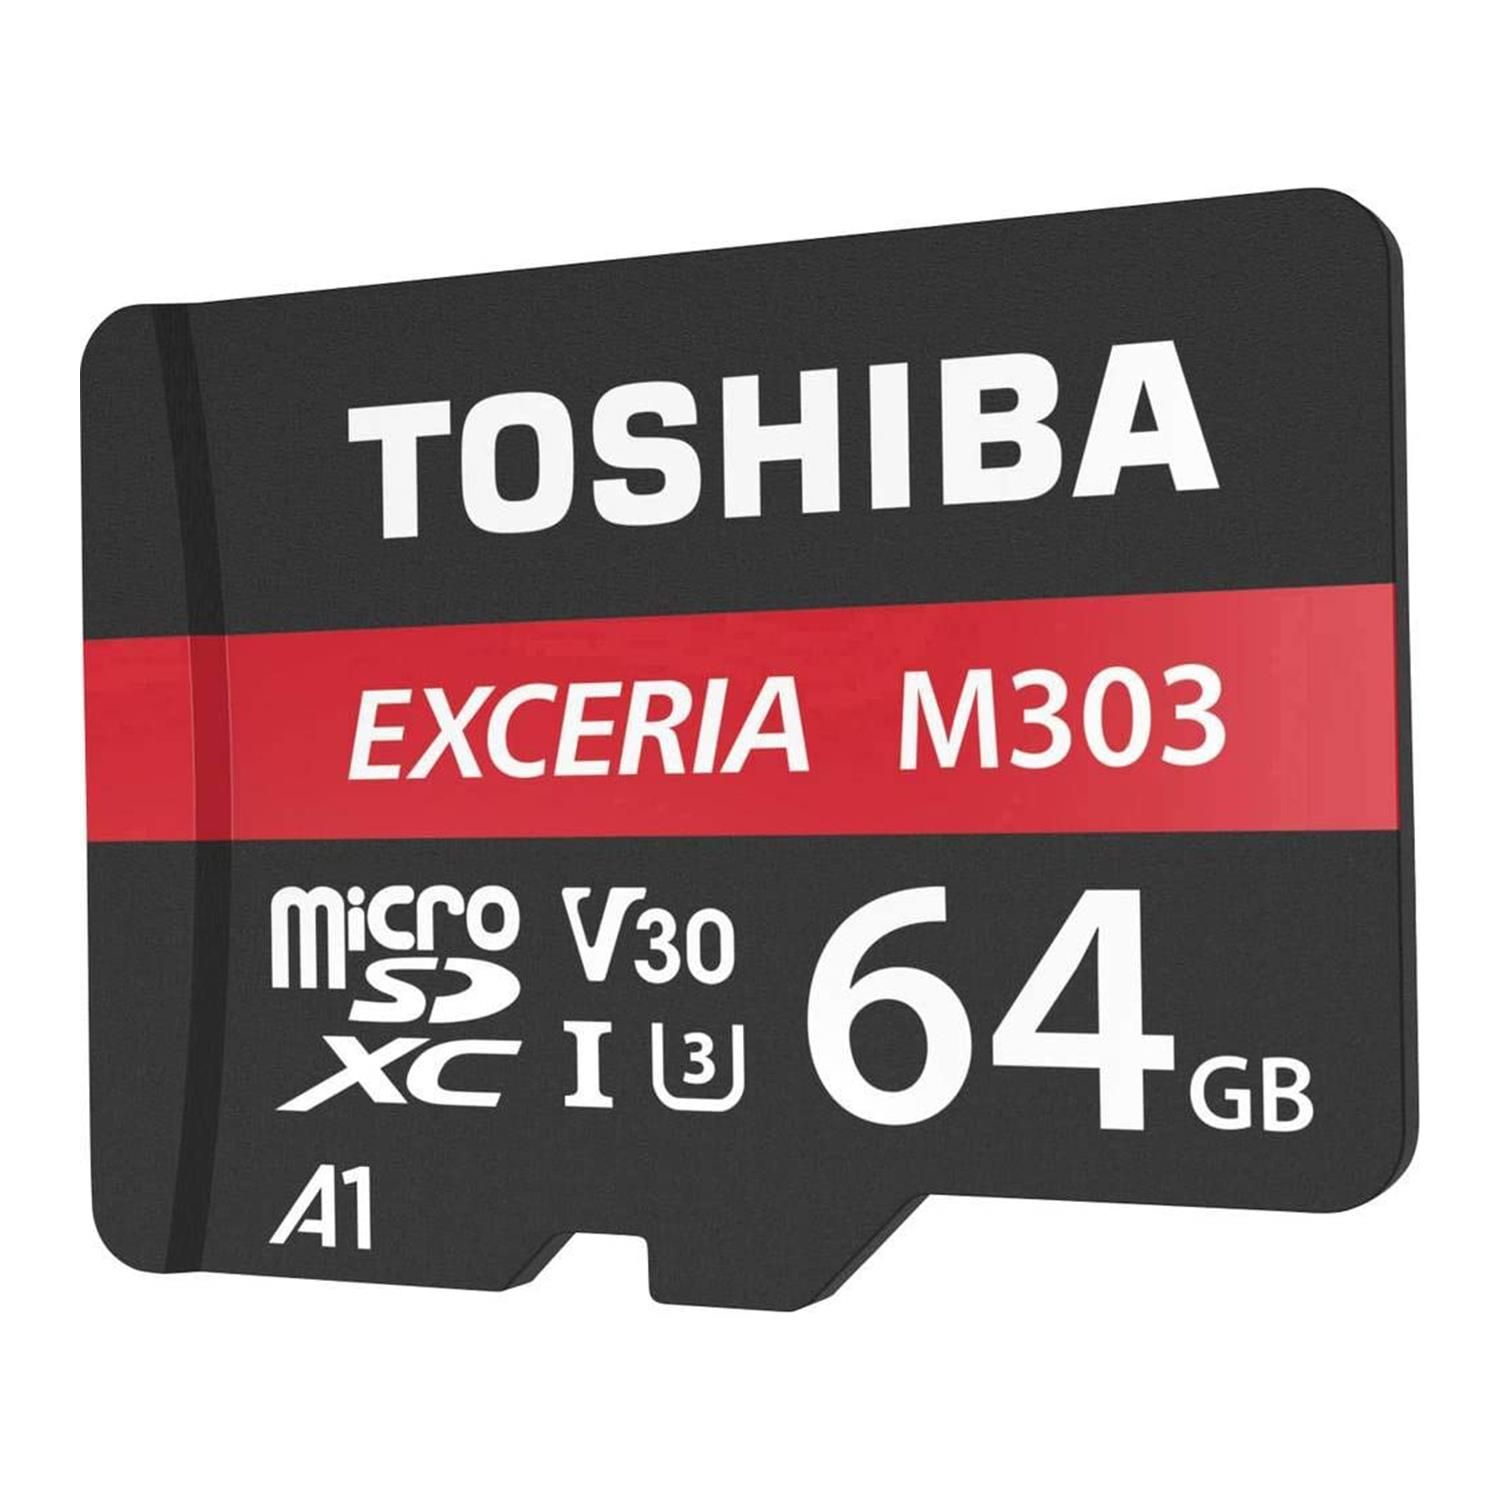 Toshiba M303 Memory Card 64GB microSDXC, 98 MB/s, Class 10, UHS-I, U3, V30, A1 with  Adapter 

Always in your pocket put the latest Toshiba SD Cards in your digital camera or your mobile device and expand your storage. Now you can take hundreds of pictures with your smartphone or store songs and videos.
Due to ultra-fast read speeds and large capacity, the Toshiba microSD card series is designed for 4K and Full HD video recording and rapid image capture. 

Features :
Specialized for 4K/full HD recording.
Designed for extreme environment usage.
Perfect for mobile devices.
Highly durable - waterproof (IPX7), shockproof and X-ray proof.

Specifications :
Package Dimension : 15x10x1cm Approx.
Read speed: Up to 90MB/s
Available capacities: 64GB
Note: Compatible with all devices supporting SDXC standards.

Package contains:1x Toshiba M303 Memory Card 64GB microSDXC, 98 MB/s, Class 10 with  Adapter 